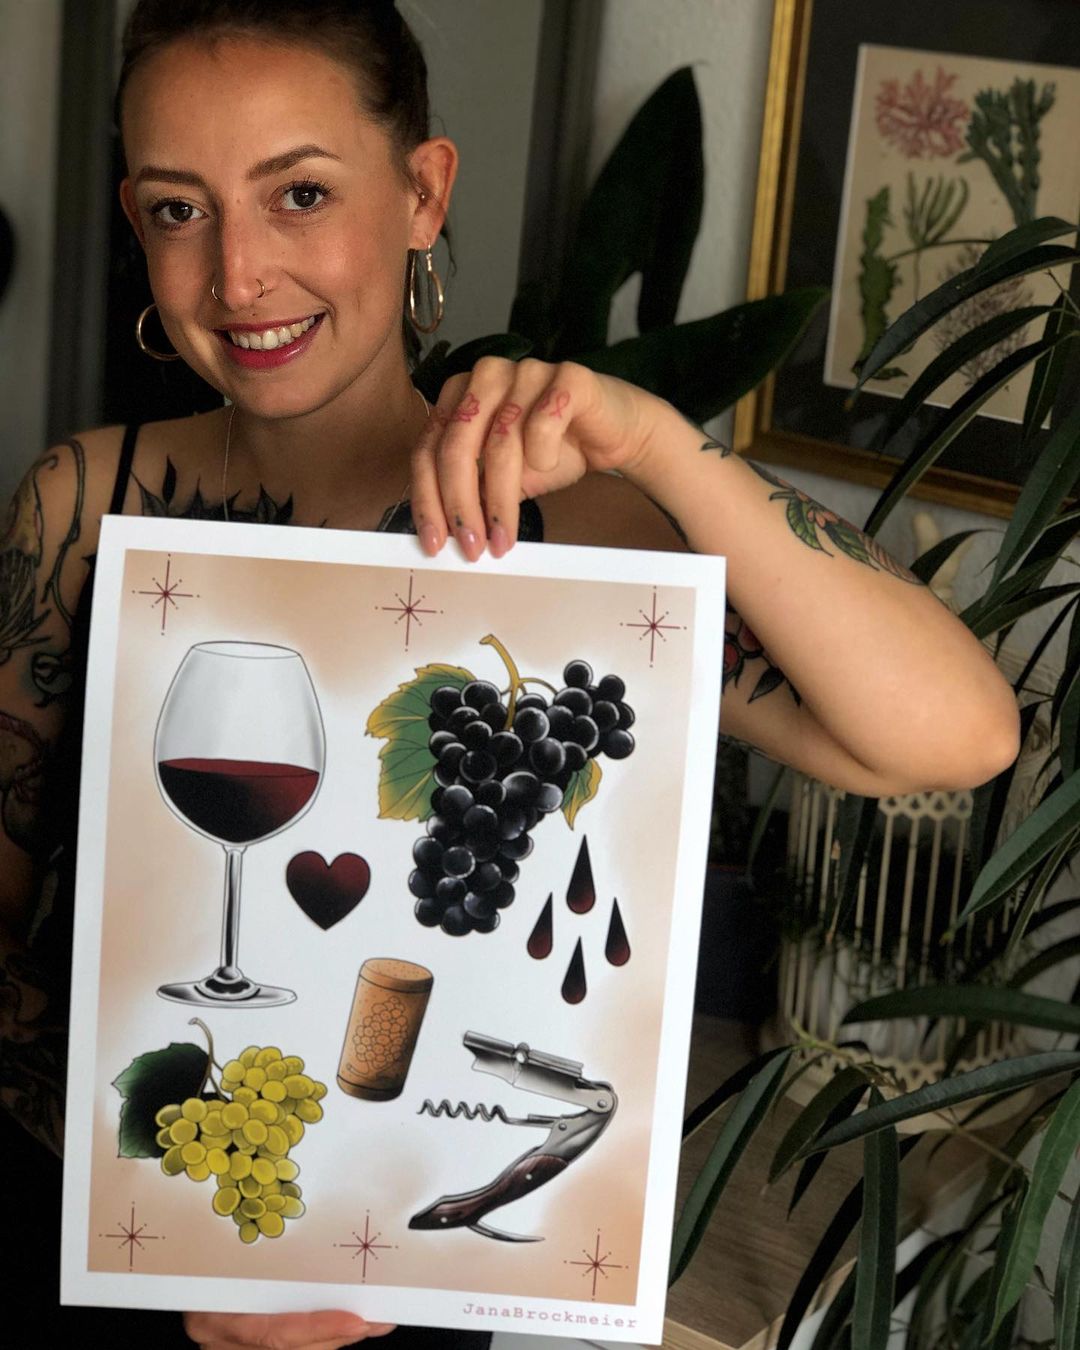 Jana for scale  #happyface #proudme #prints #tattooprints #winelover #beerlover